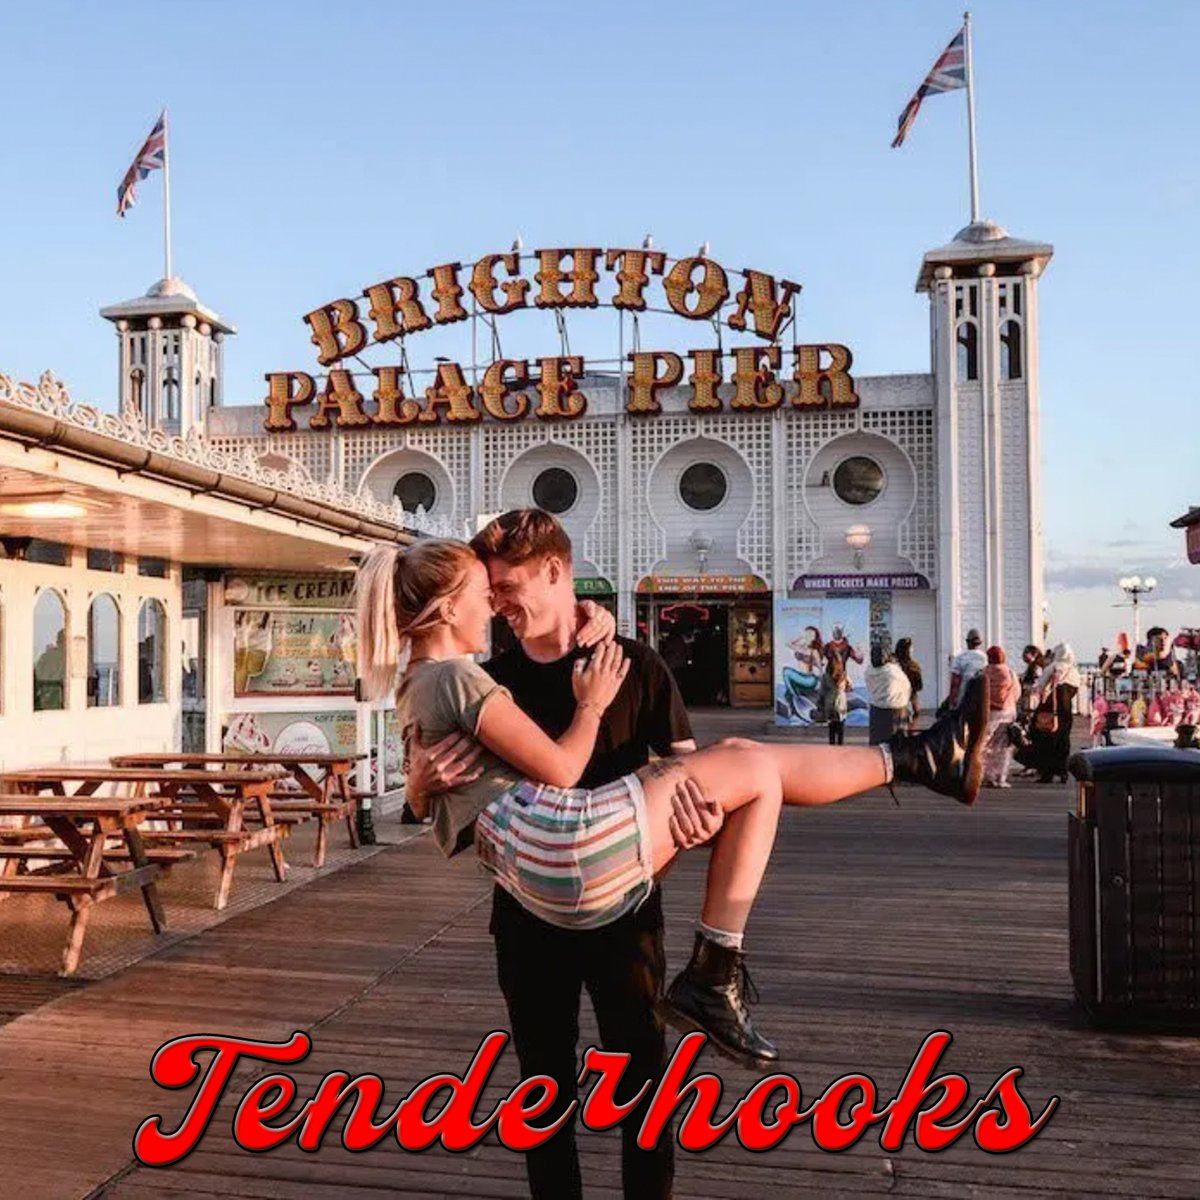 We can't wait for the Tenderhooks new single out tomorrow! And guess what's it's called? Yes! 'Palace Pier' - a love story set to upbeat pop-rock music - that's just up our promenade!! #tenderhooks #lovesong #palacepier #romance #hitsingle 😍🎸💘